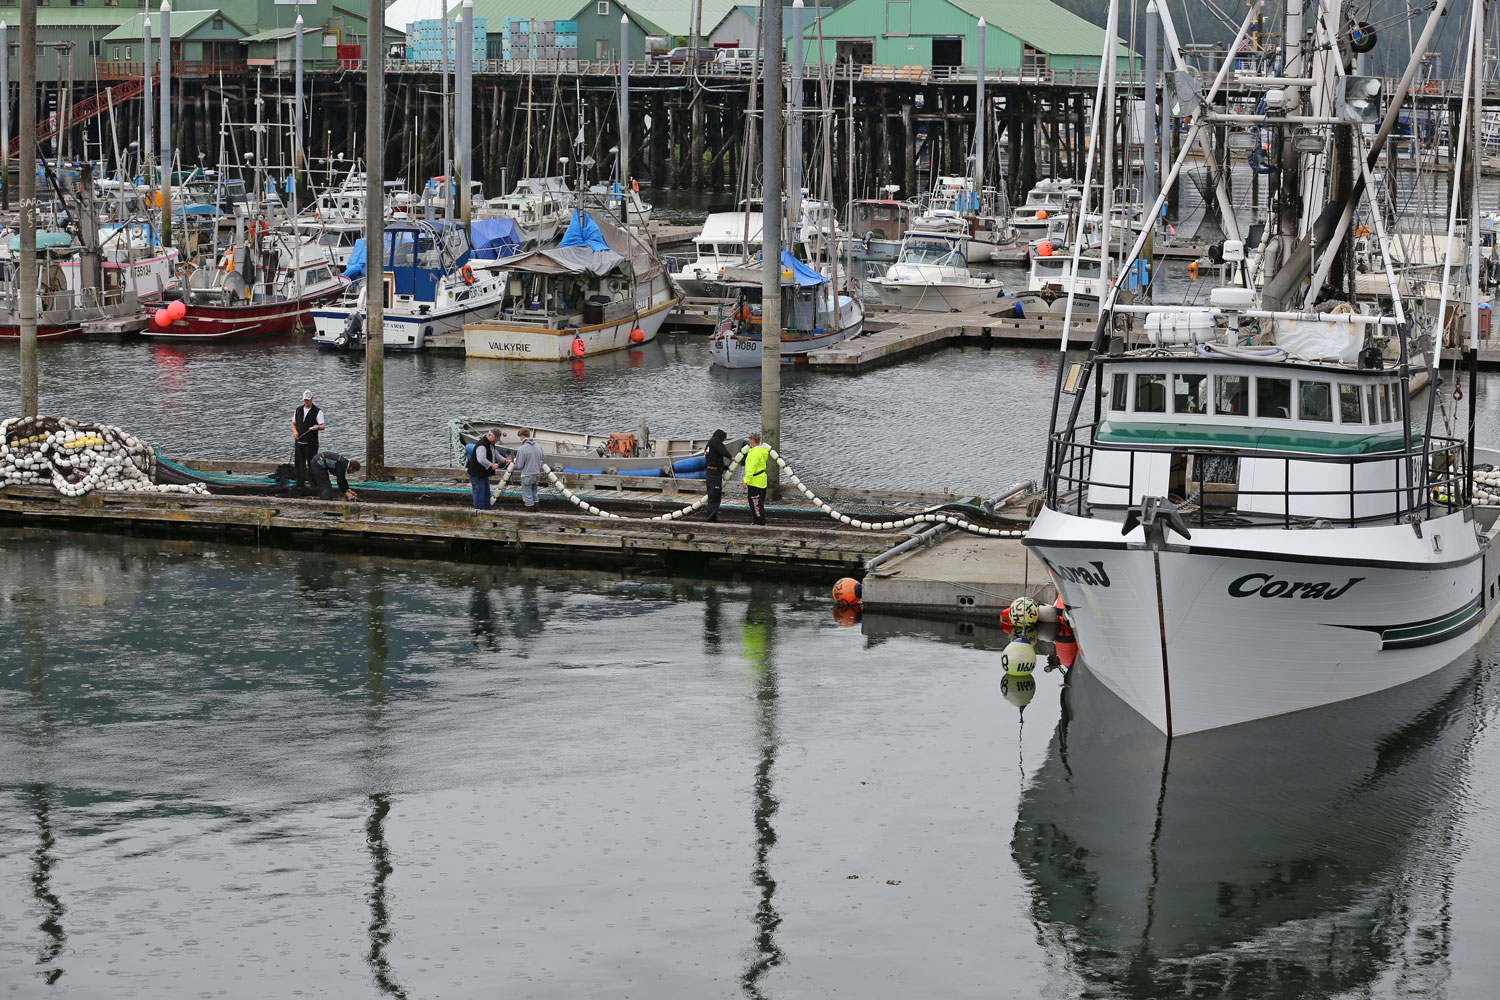 The crew of the Cora J ignores the rain and keeps working on the net. 